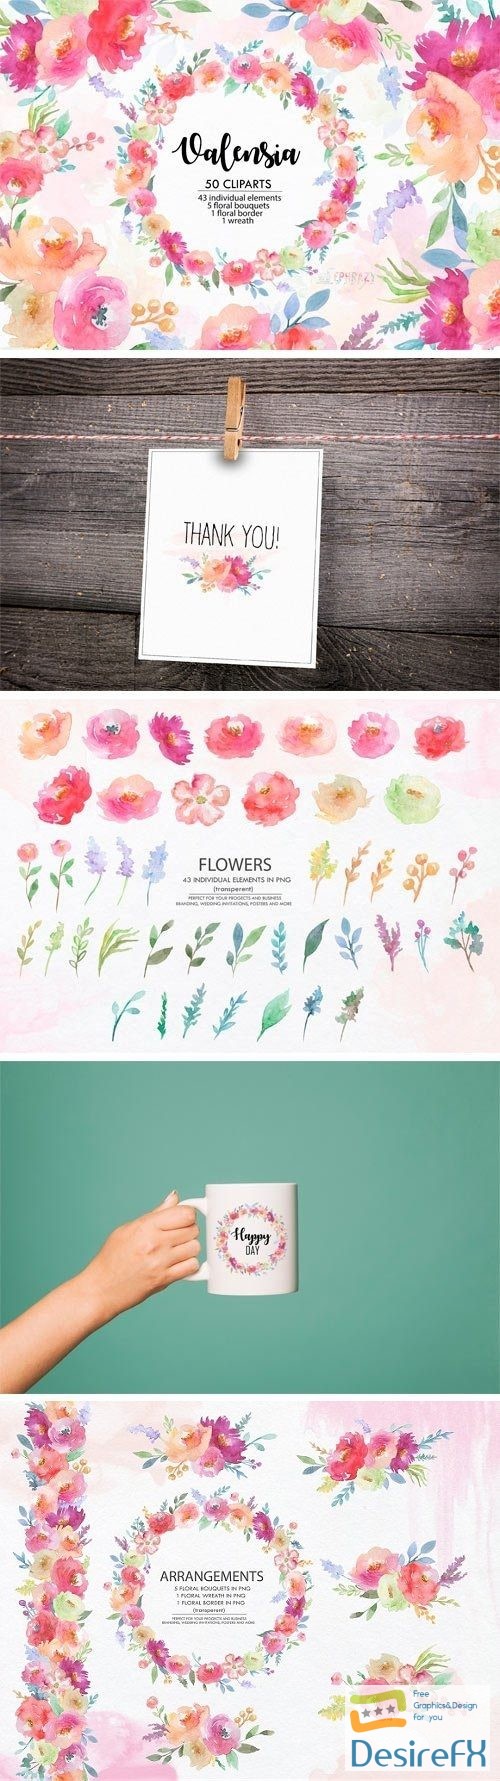 Valensia. Floral Clipart. Watercolor - 2370436